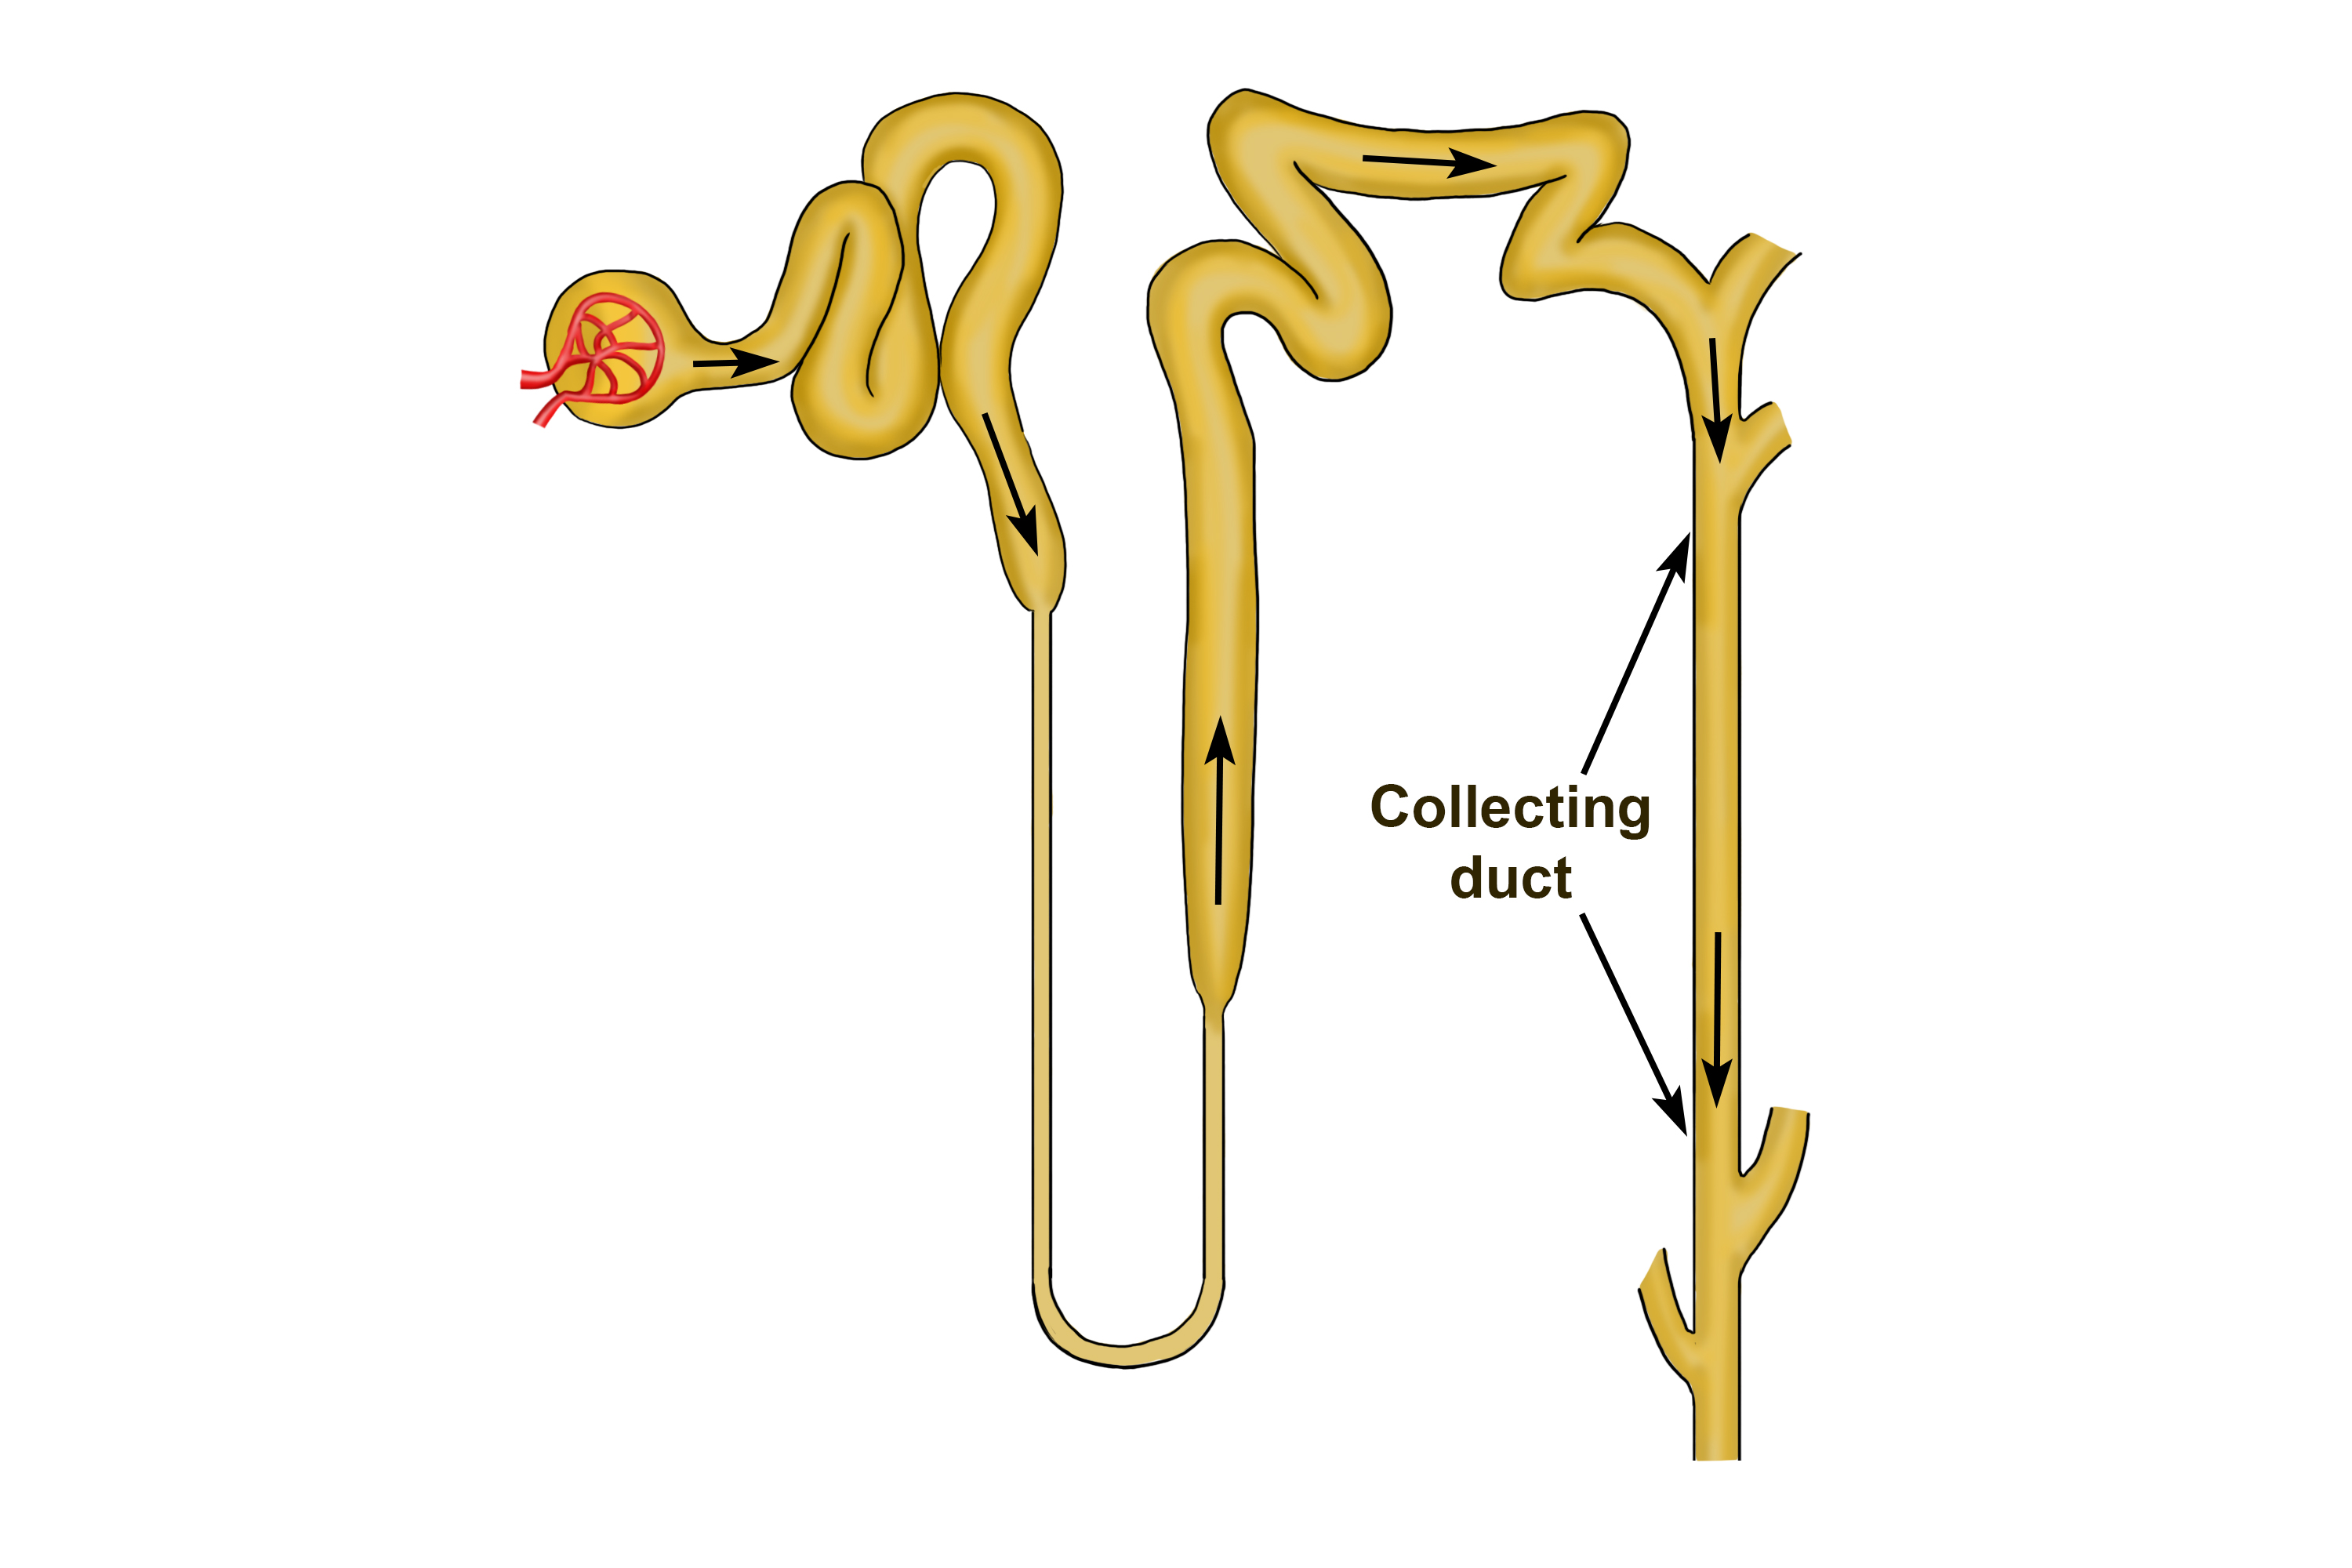 The filtrate that remains in the tubule enters the collecting duct